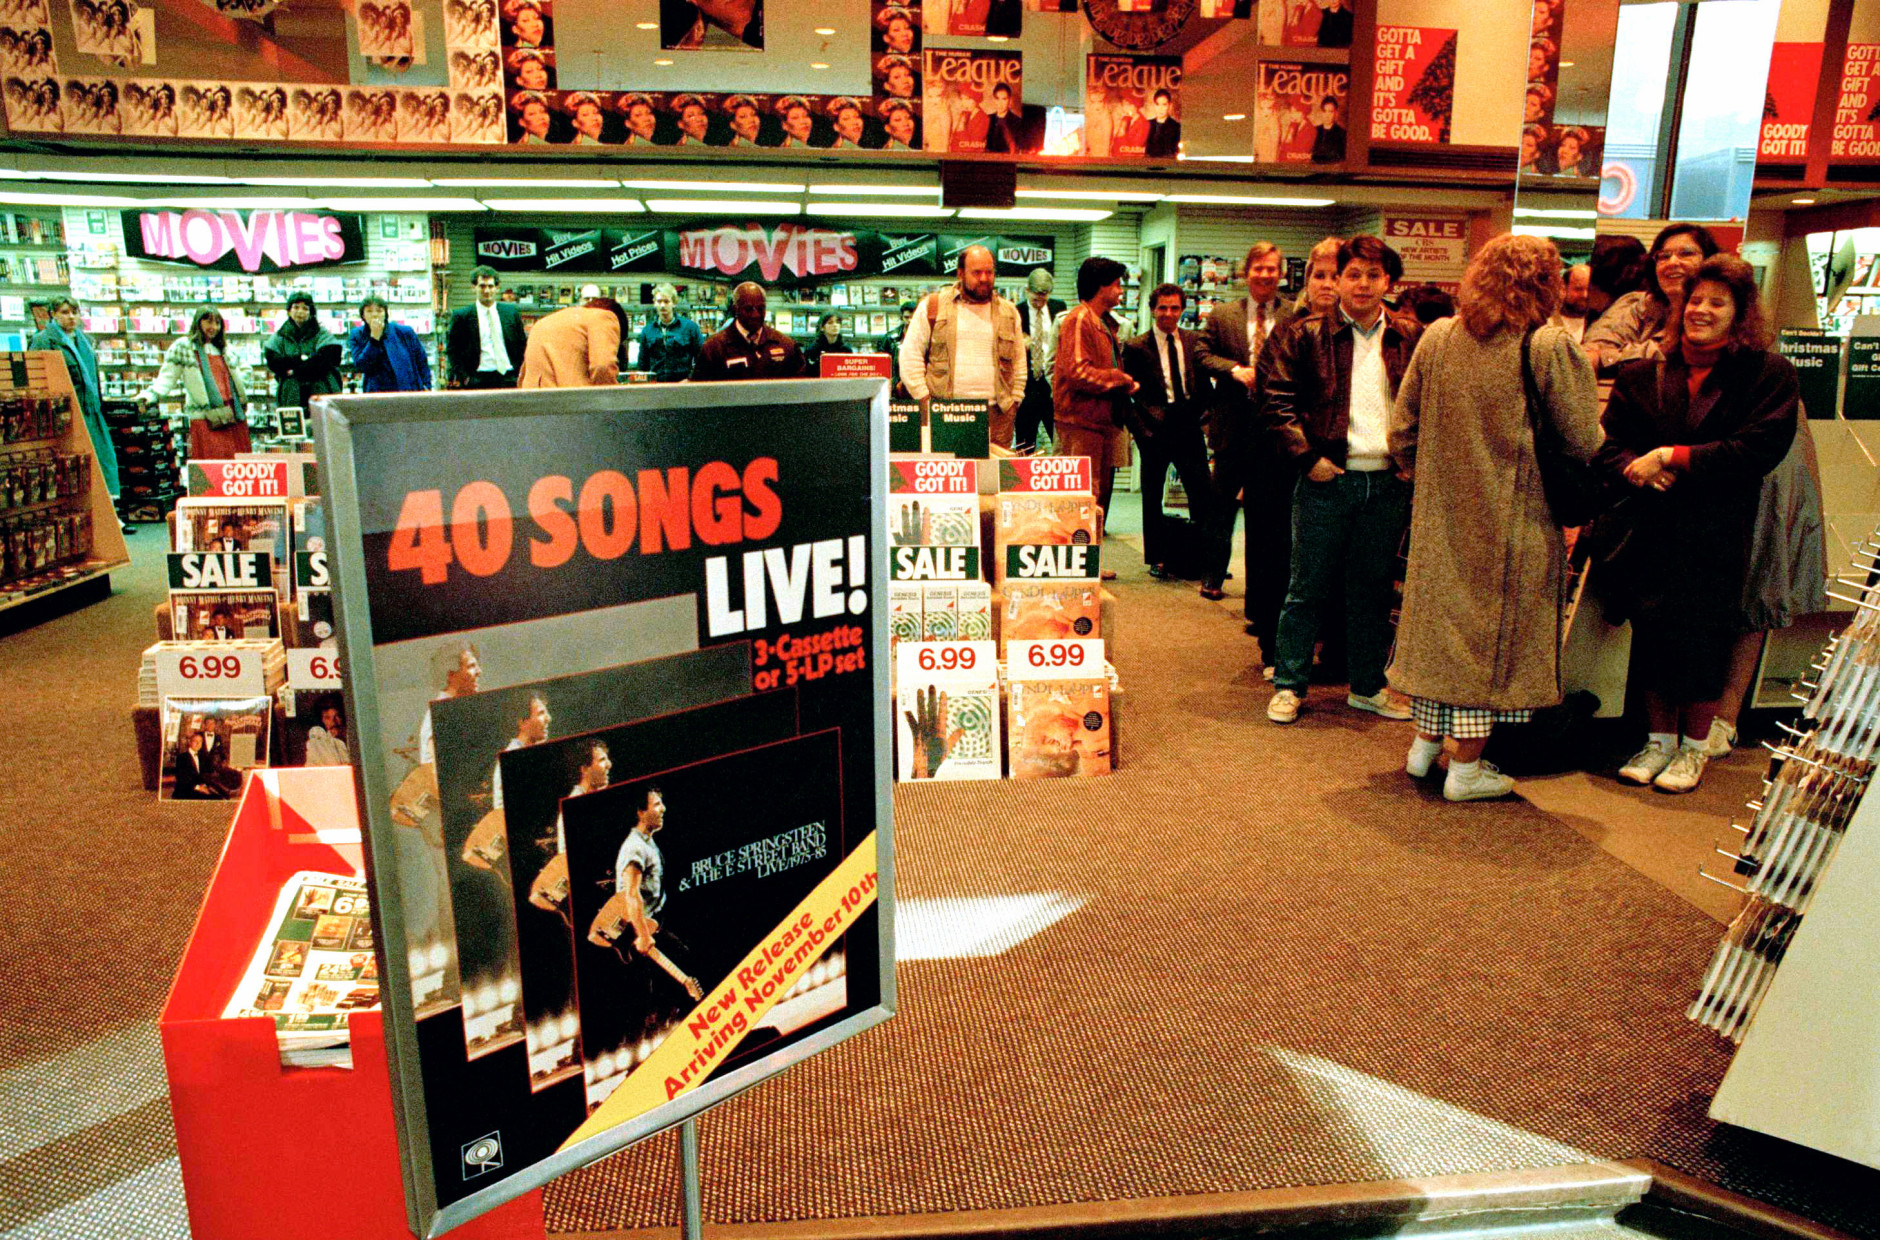 On this date in 1975, the Bruce Springsteen album "Born to Run" was released by Columbia Records. Here, buyers at Sam Goody's Record Store in midtown Manhattan wait for Bruce Springsteen's first live album to go on sale in New York, Monday, Nov. 10, 1986. (AP Photo / Richard Drew)